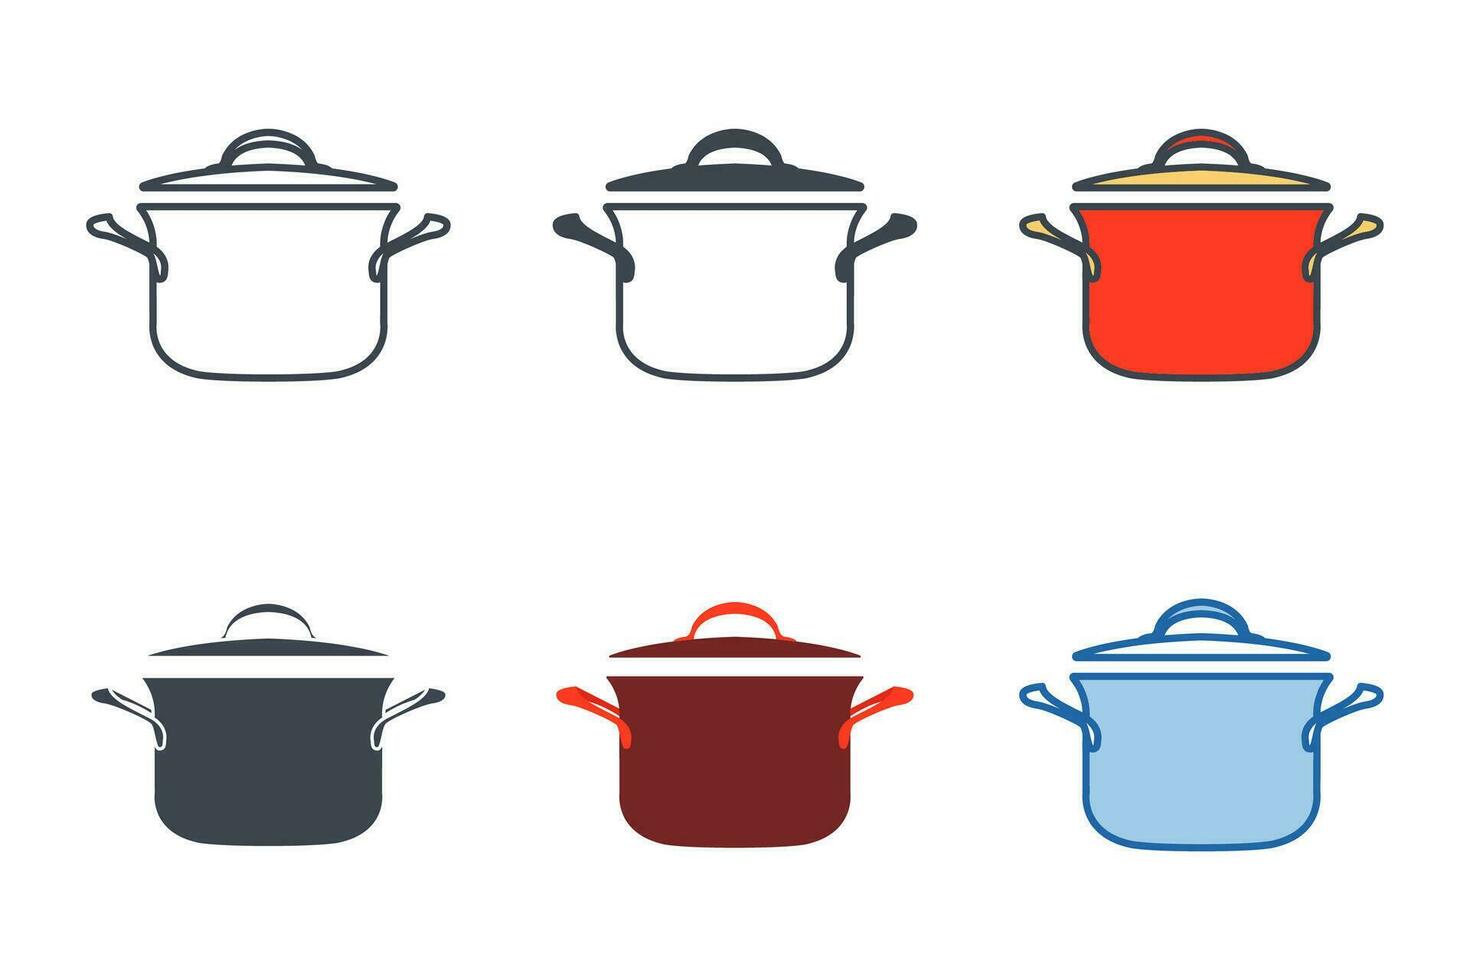 cooking pot icon collection with different styles. Saucepan icon symbol vector illustration isolated on white background